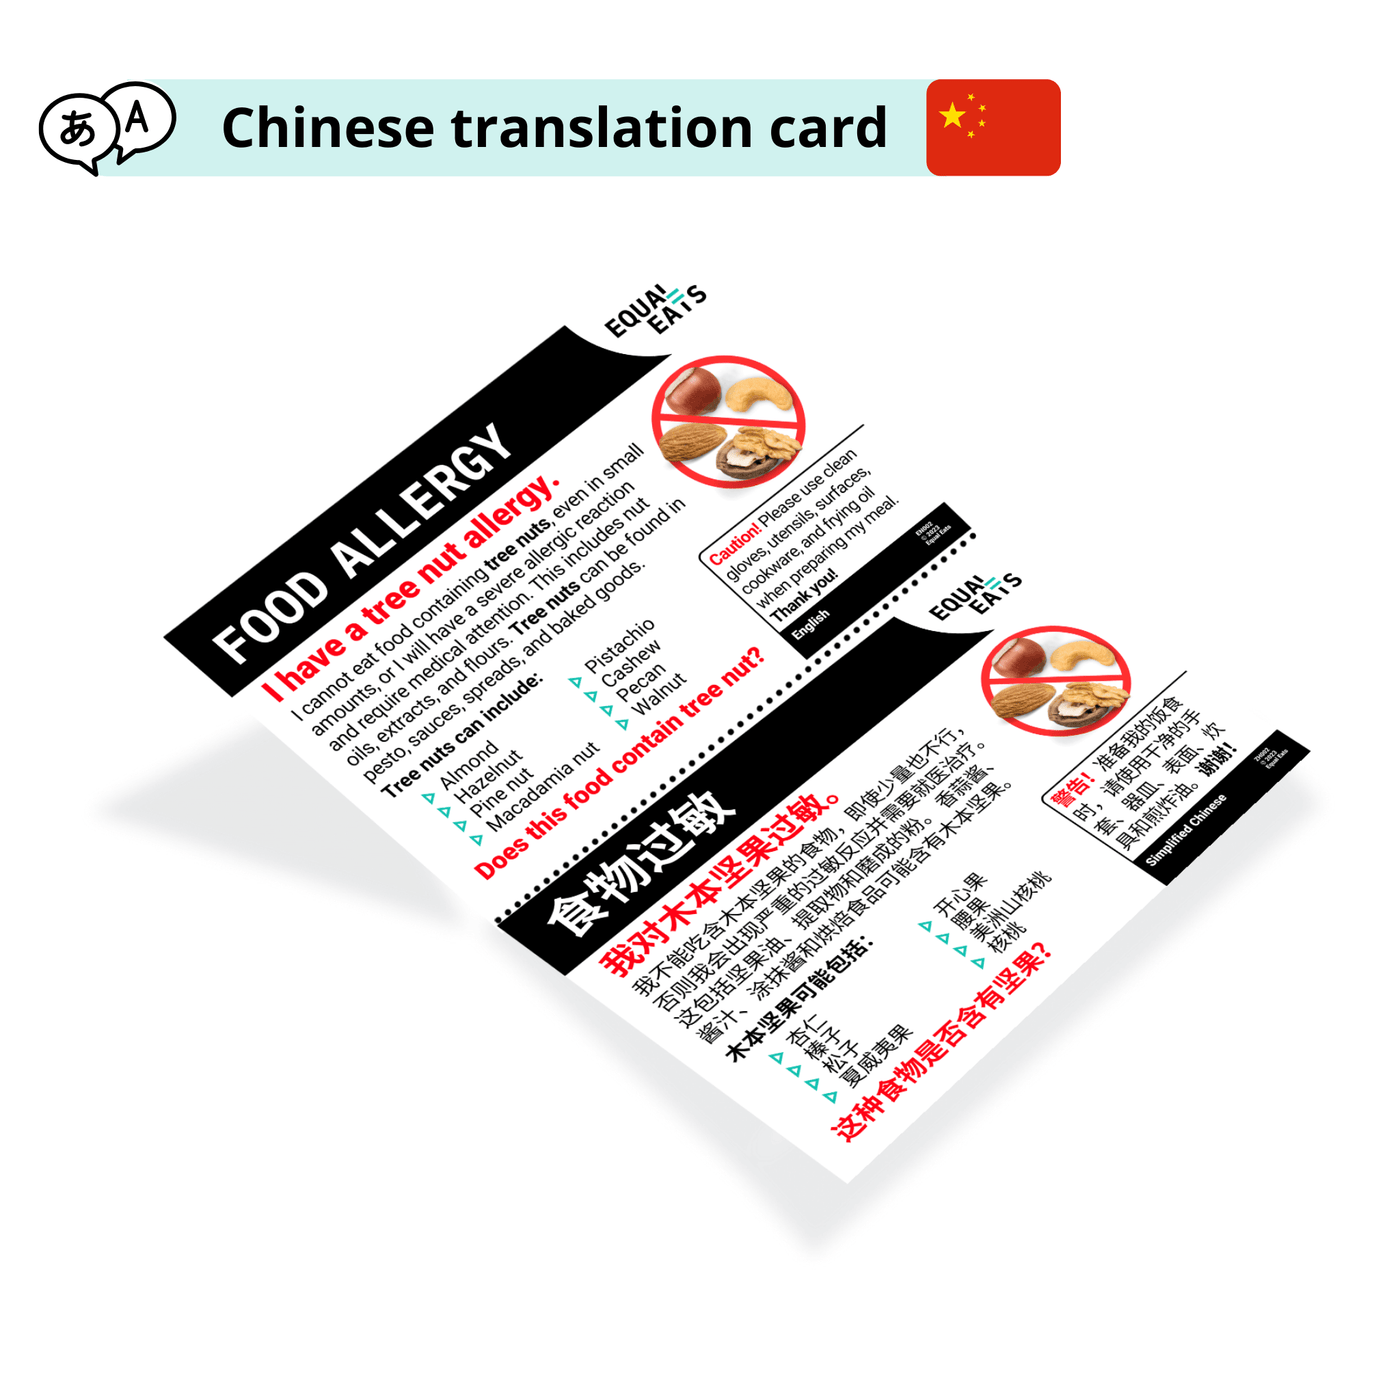 Simplified Chinese Tree Nut Allergy Card